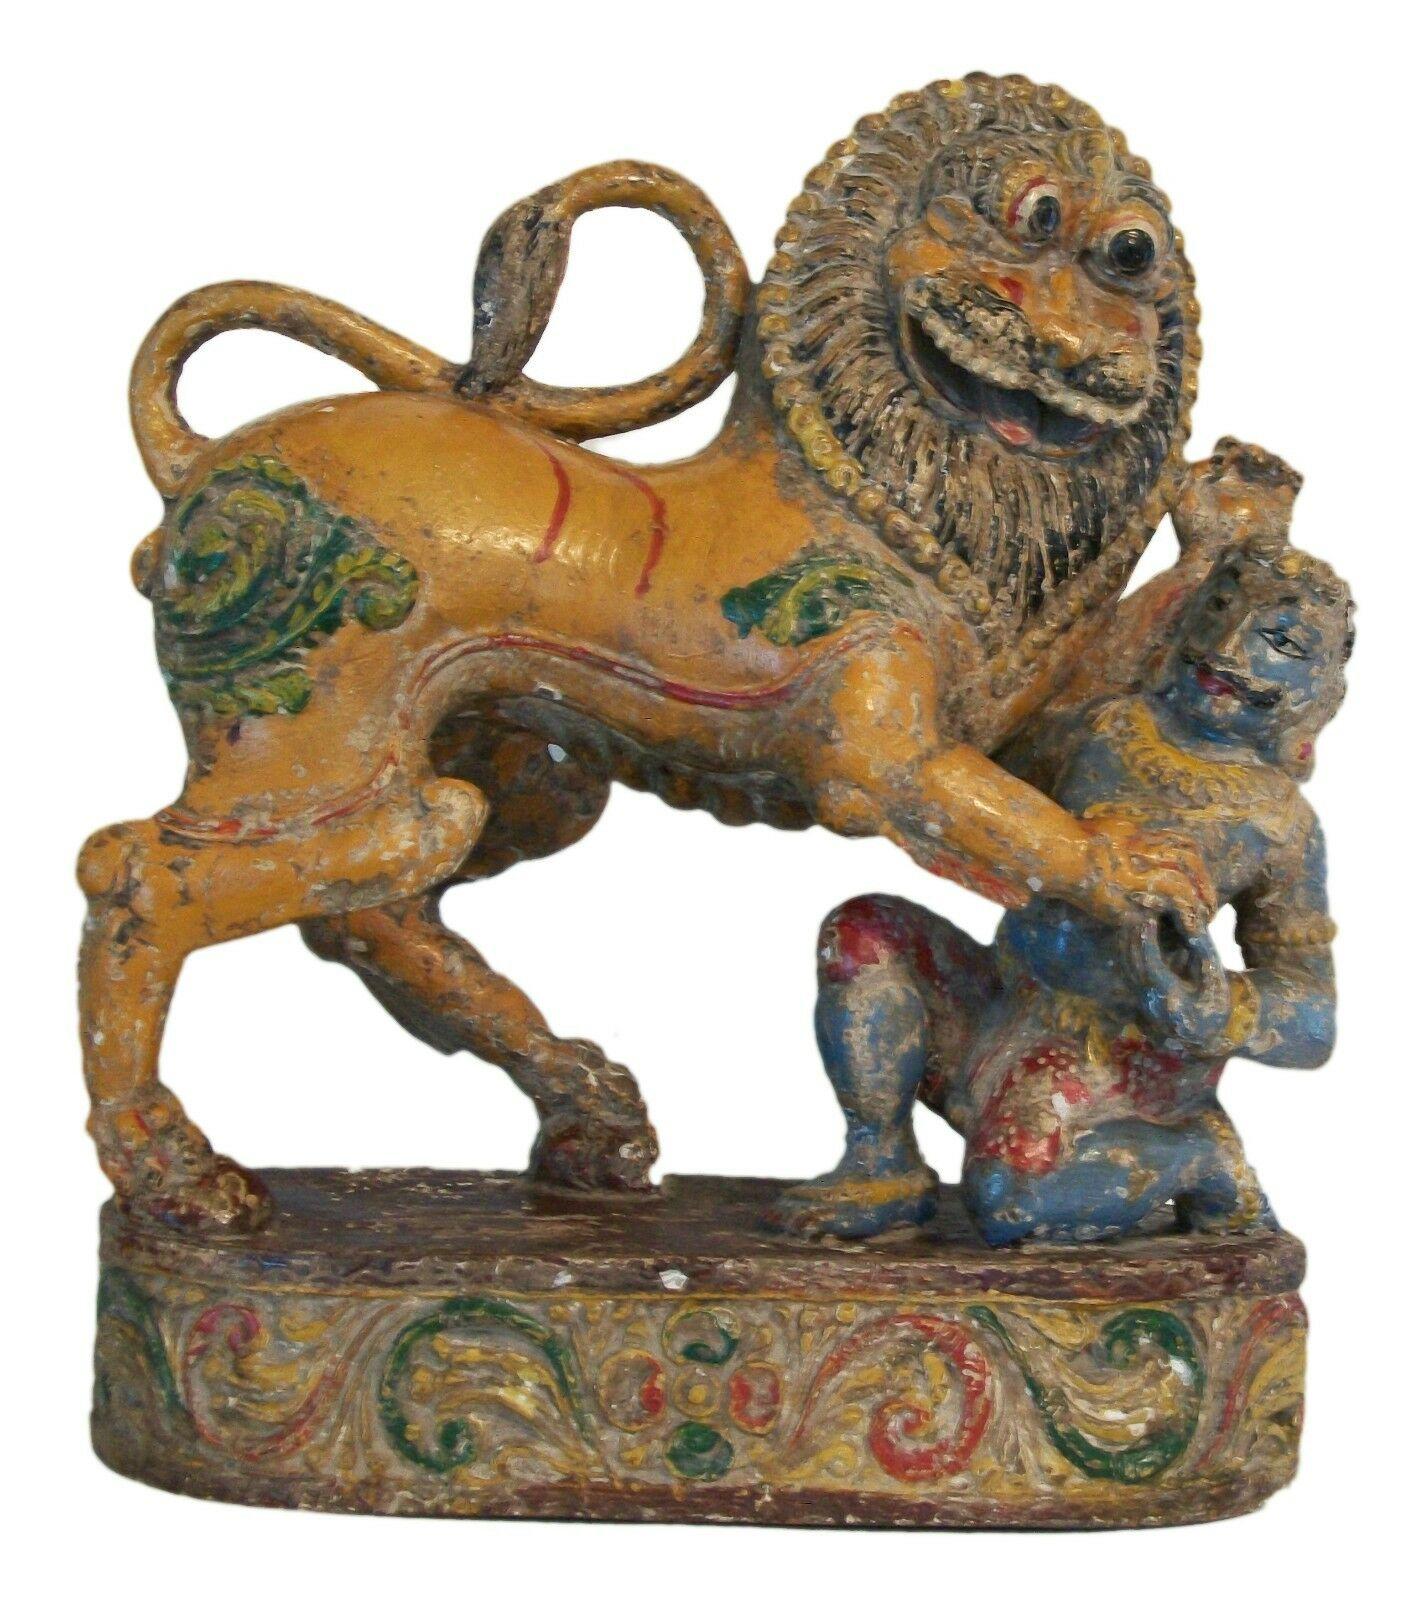 Antique Tamil Nadu massive ferocious mythical lion (Yali) and hunter sculpture - hand carved from a single piece of wood (likely teak or walnut) - multi color painted finish with fine detail - unsigned - India (Tamil Nadu) - 19th